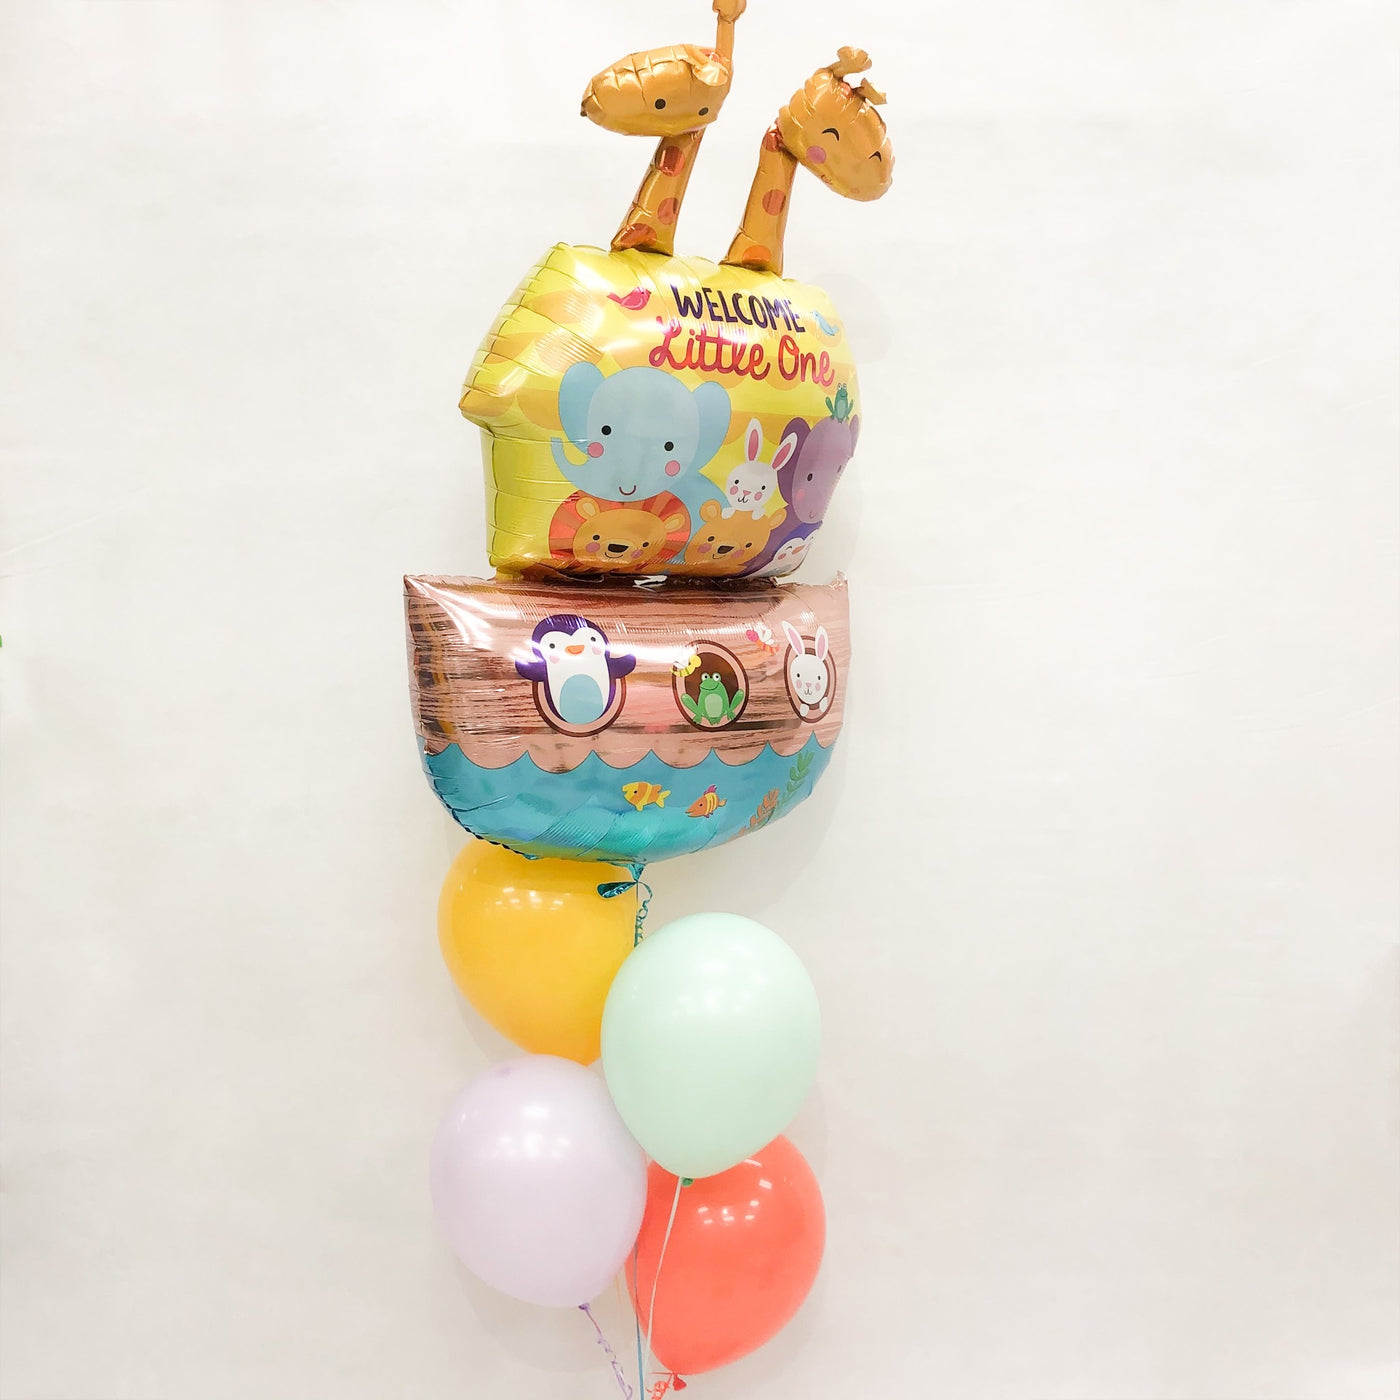 Welcome Baby Balloon Bouquet